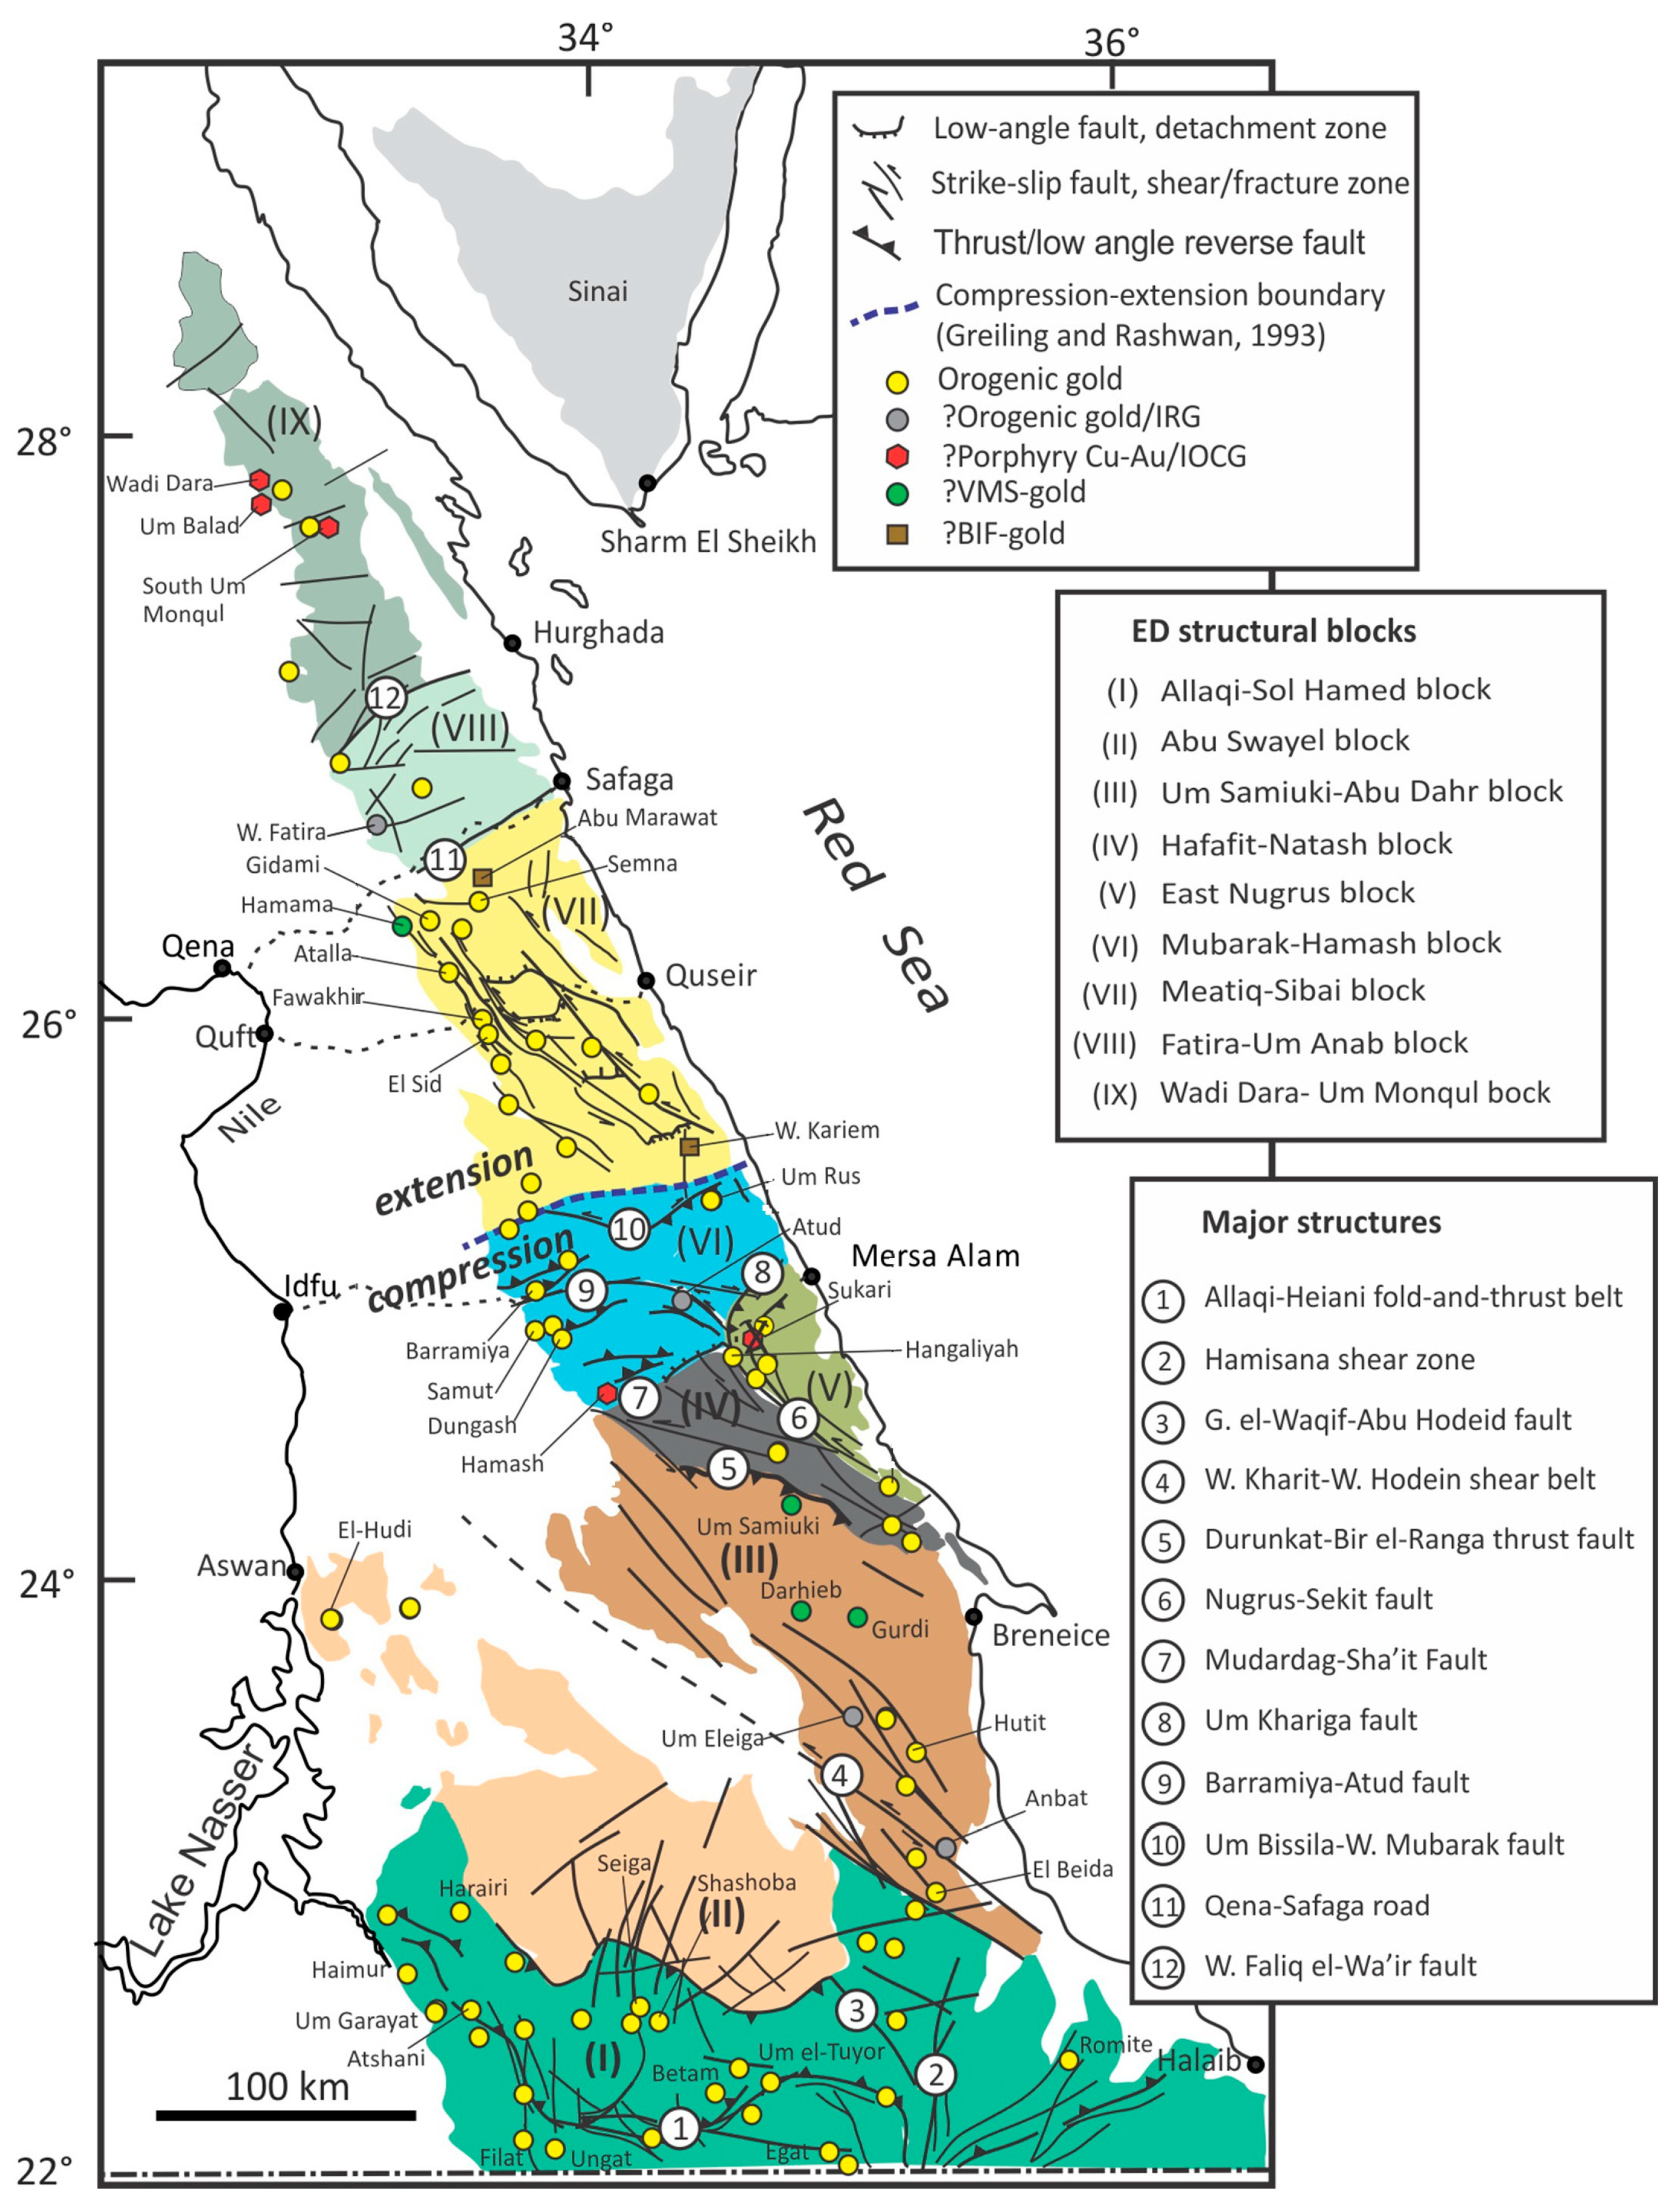 Minerals | Free Full-Text | Post-Subduction Granite Magmatism and  Gold-Sulfide Mineralization in the Abu Zawal (Fatira) Area, Eastern Desert,  Egypt